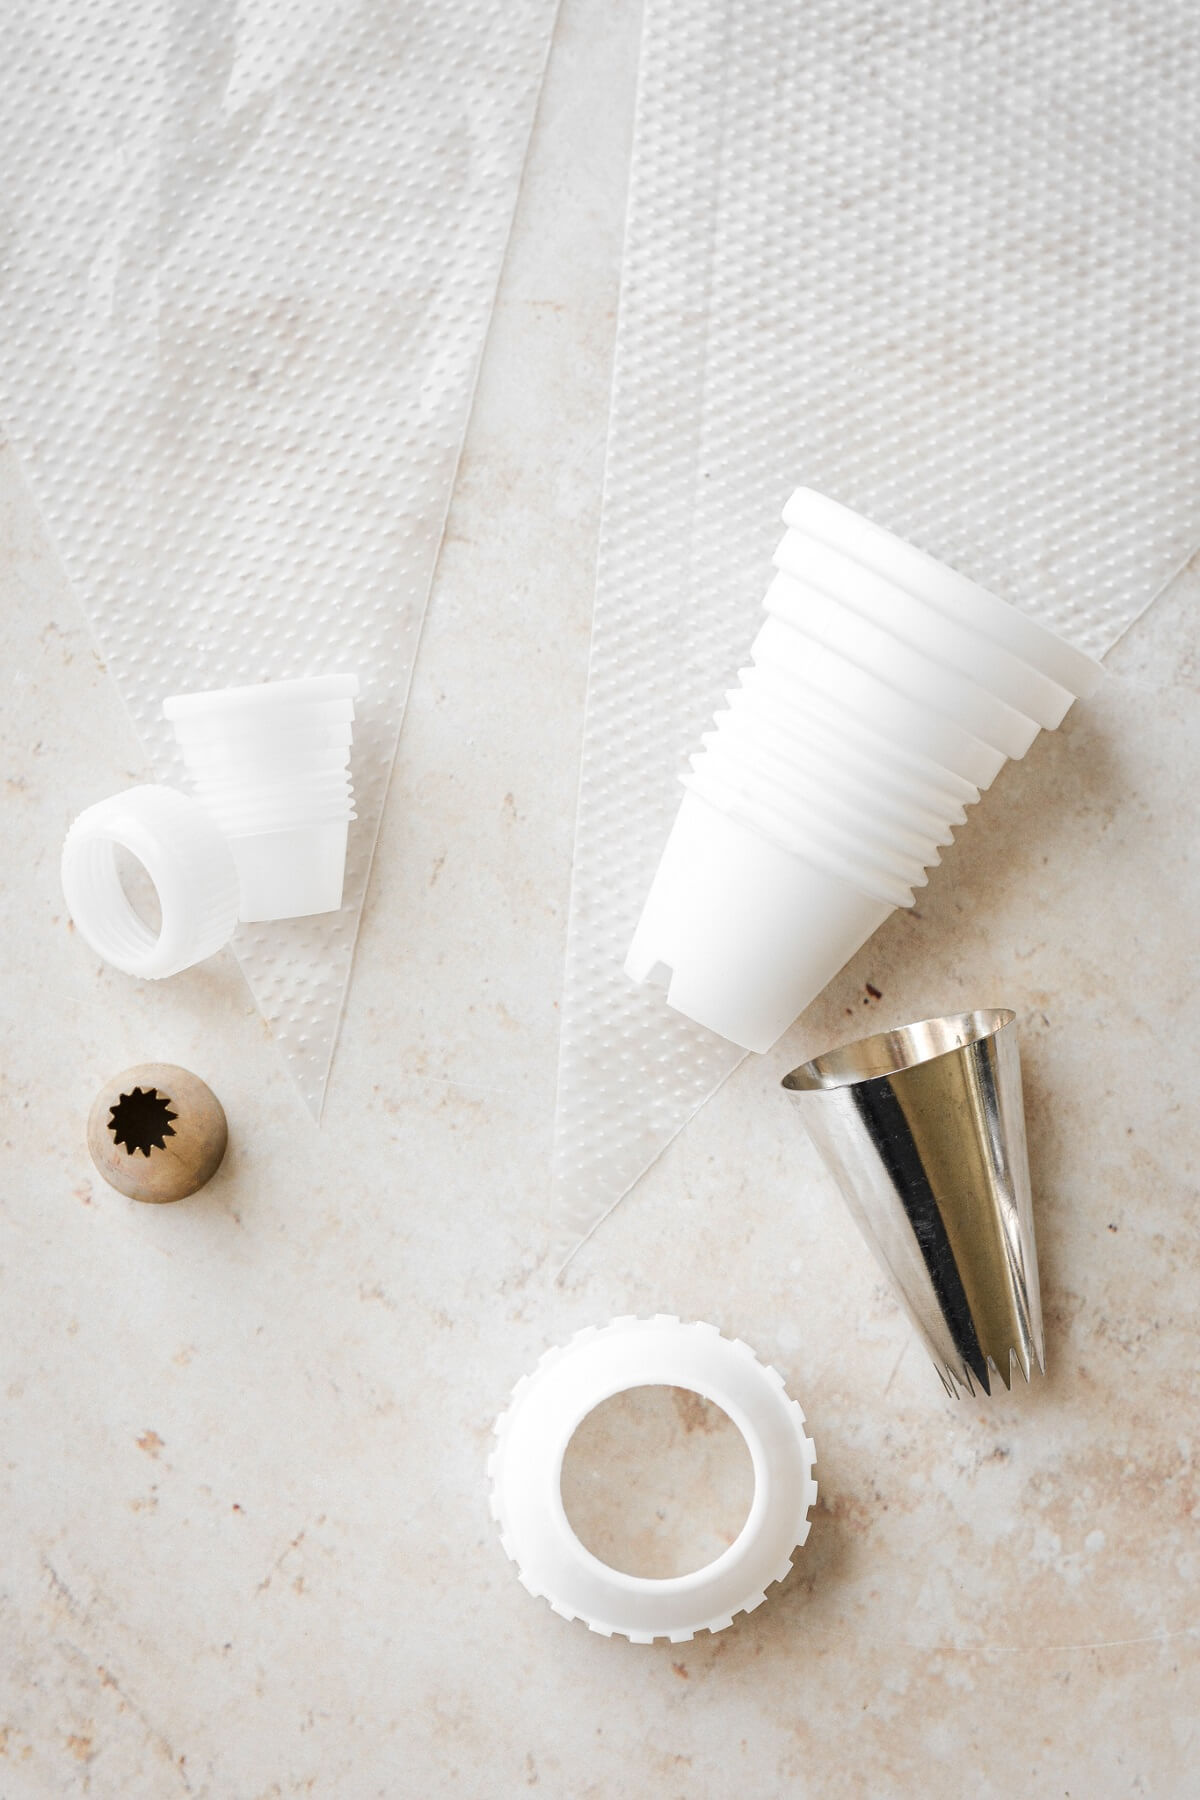 Piping tips, couplers and piping bags.